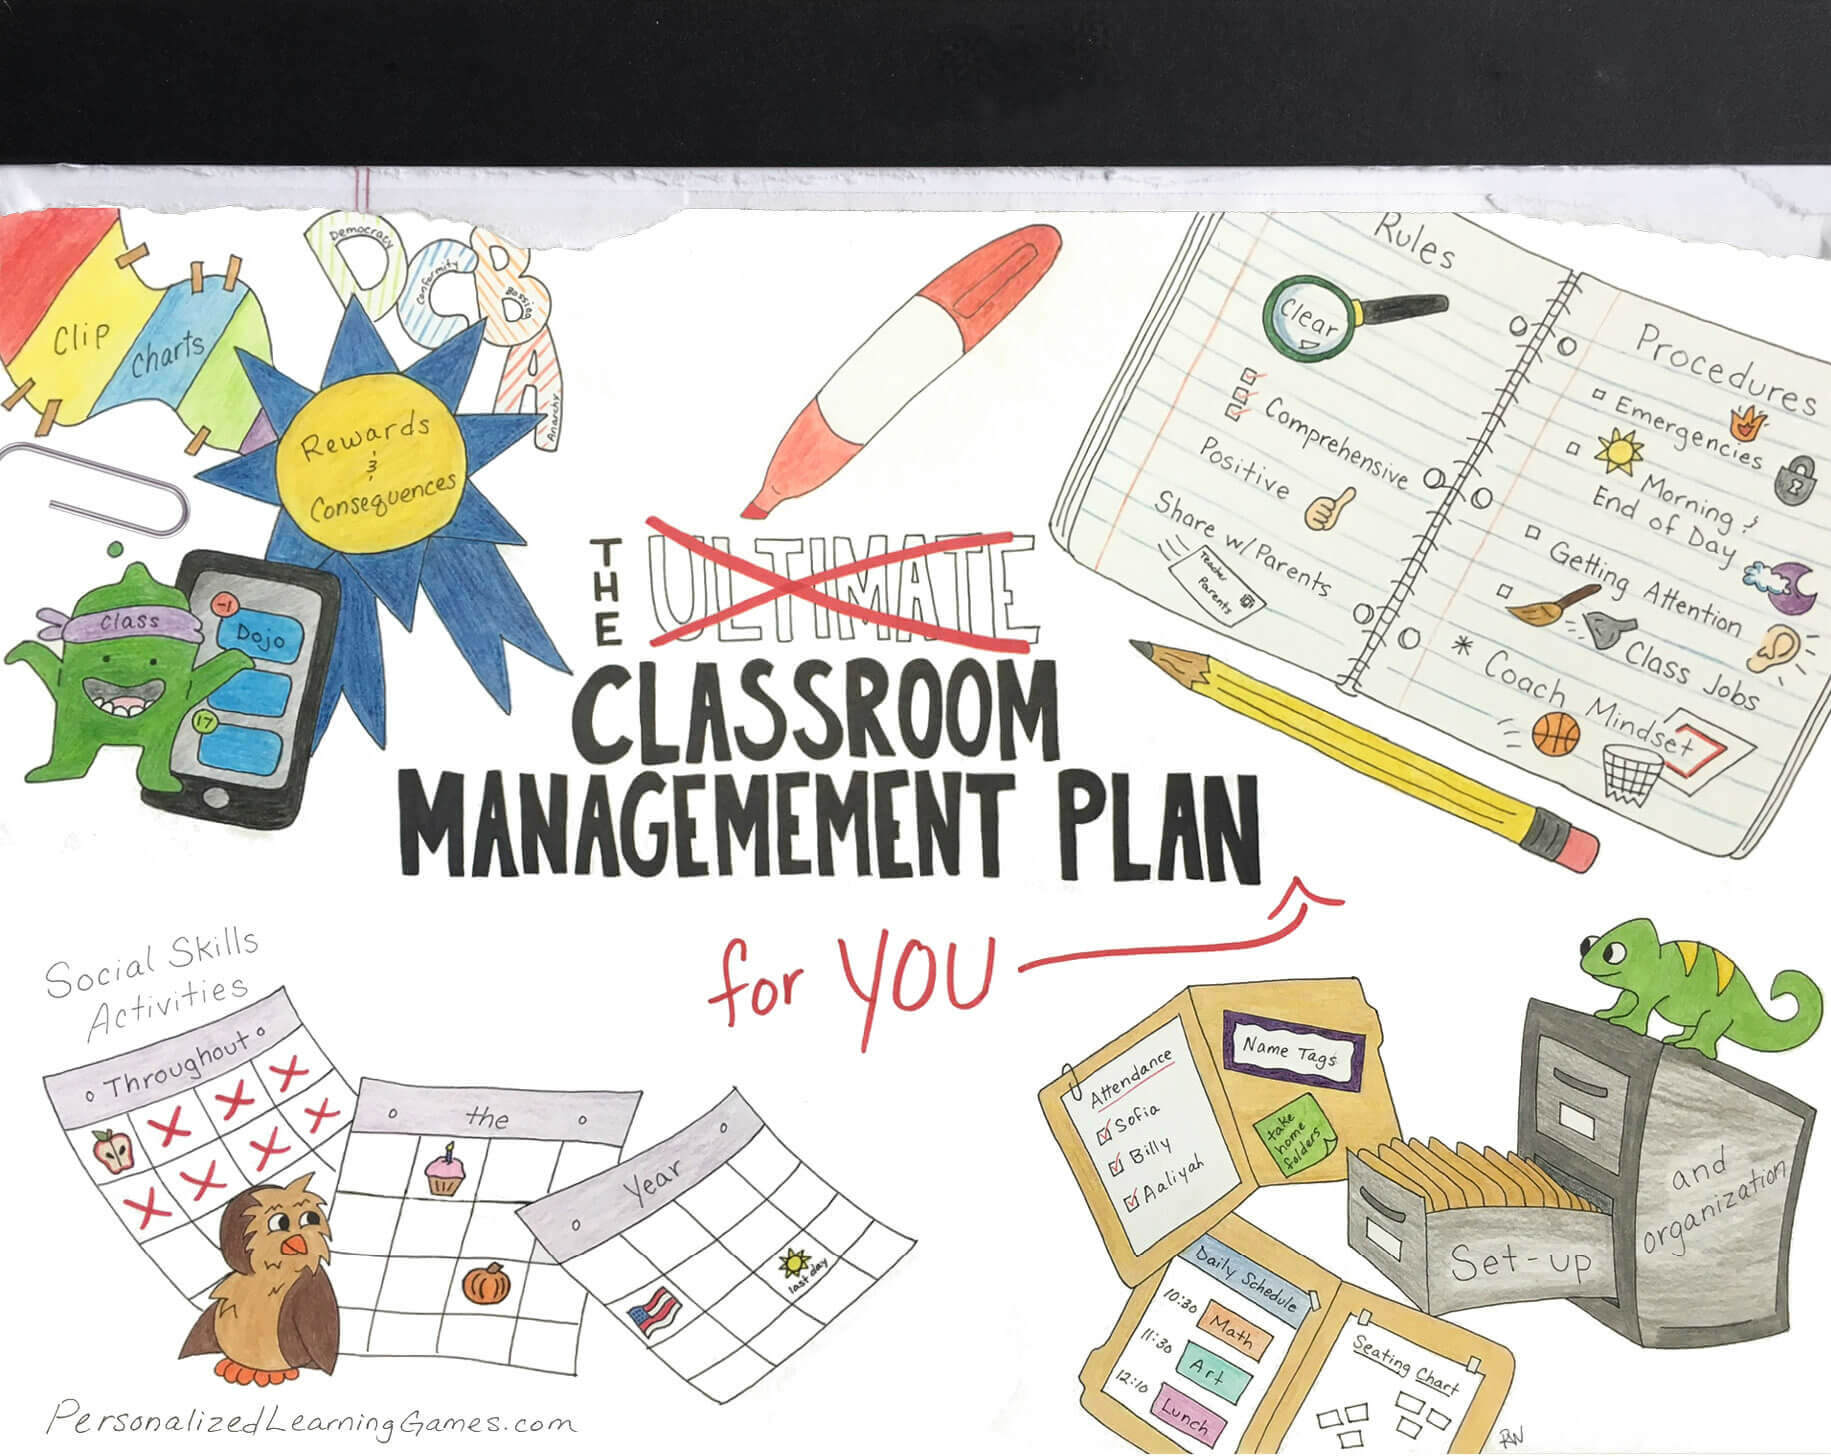 A classroom management for. Checklist clipart action plan